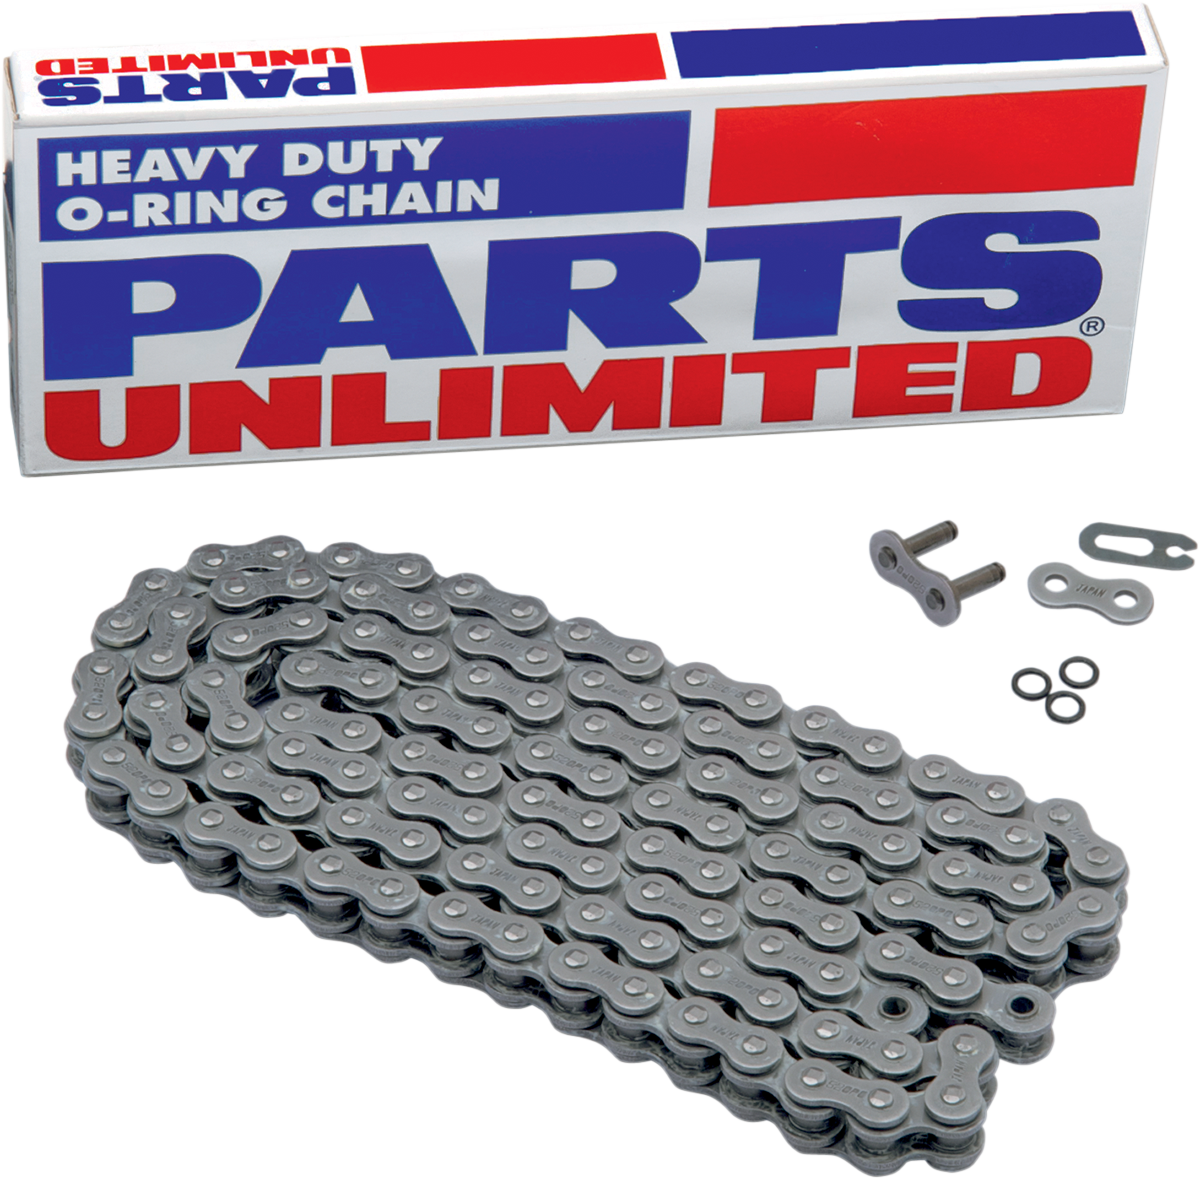 PARTS UNLIMITED-CHAIN MOTORCYCLE CHAIN CHAIN PU 520 O-RING X 88L